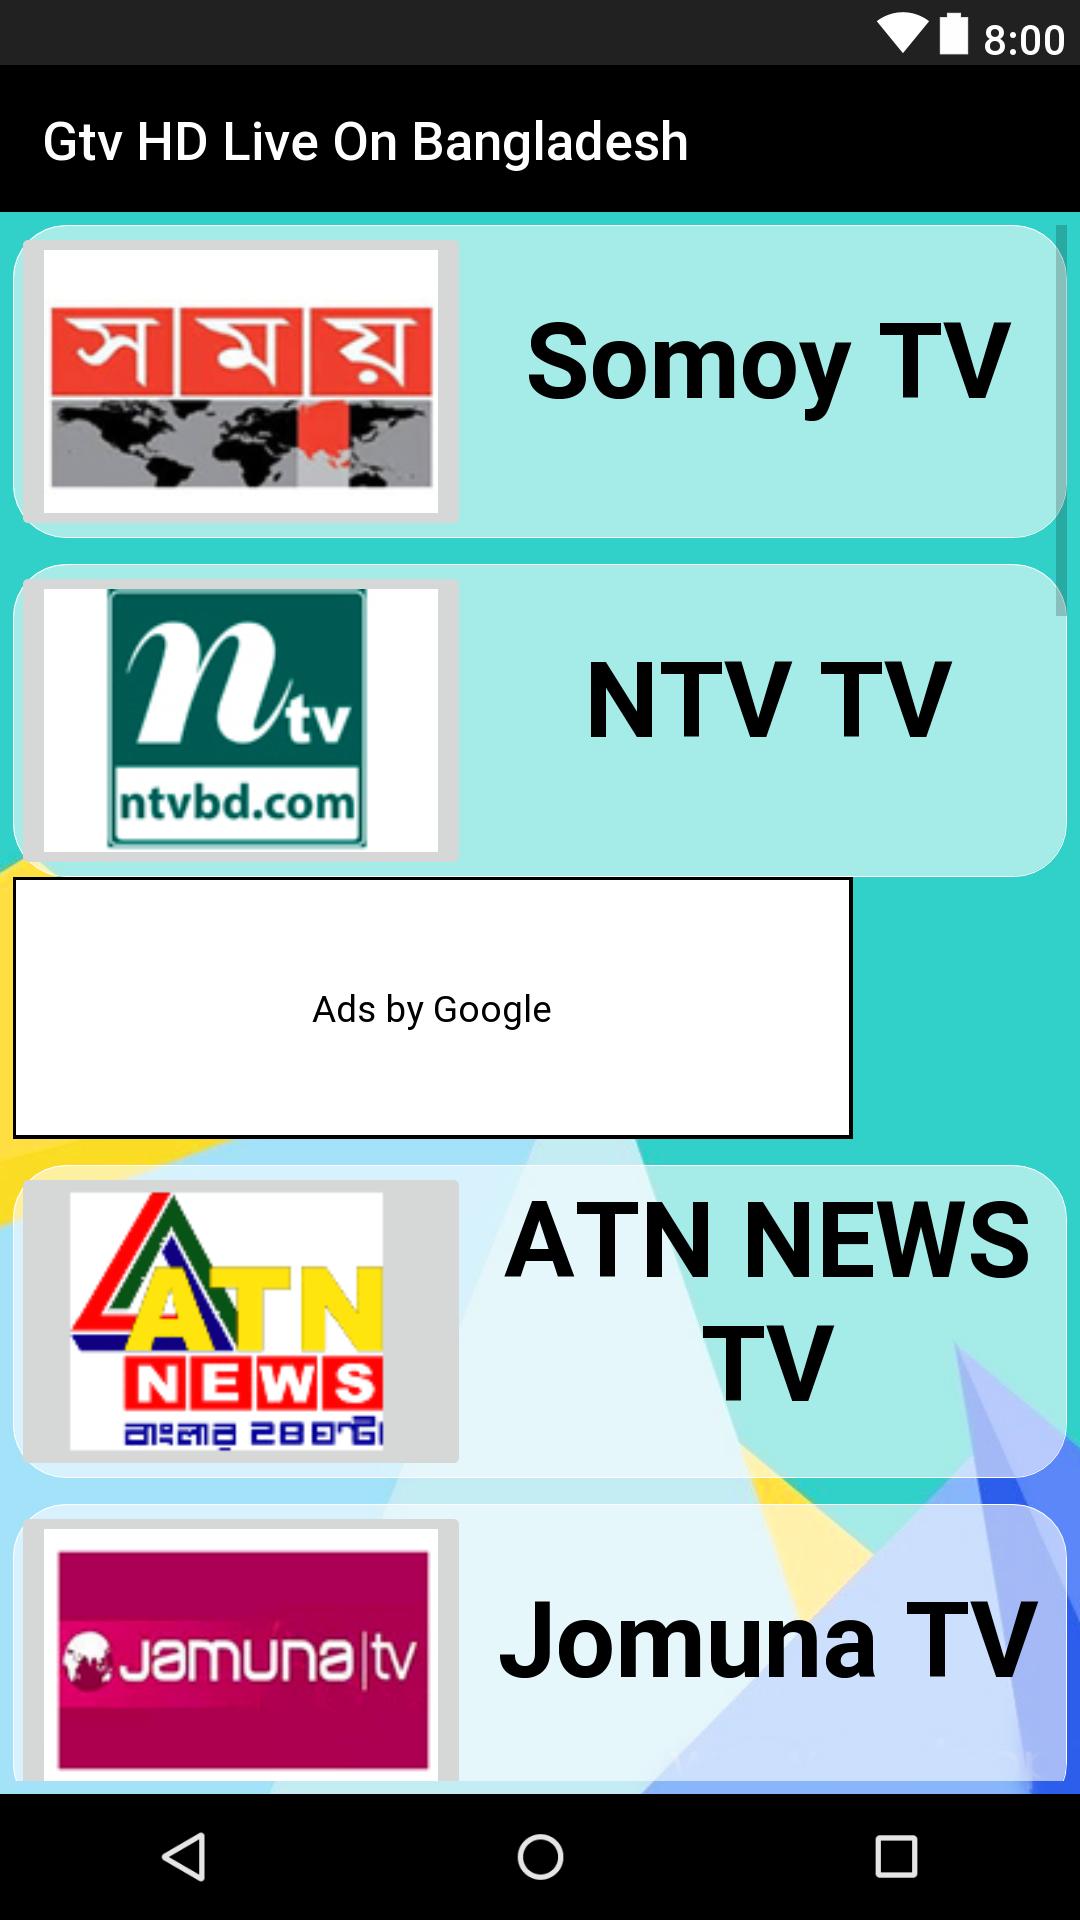 Gtv Live HD On Bangladesh for Android - APK Download